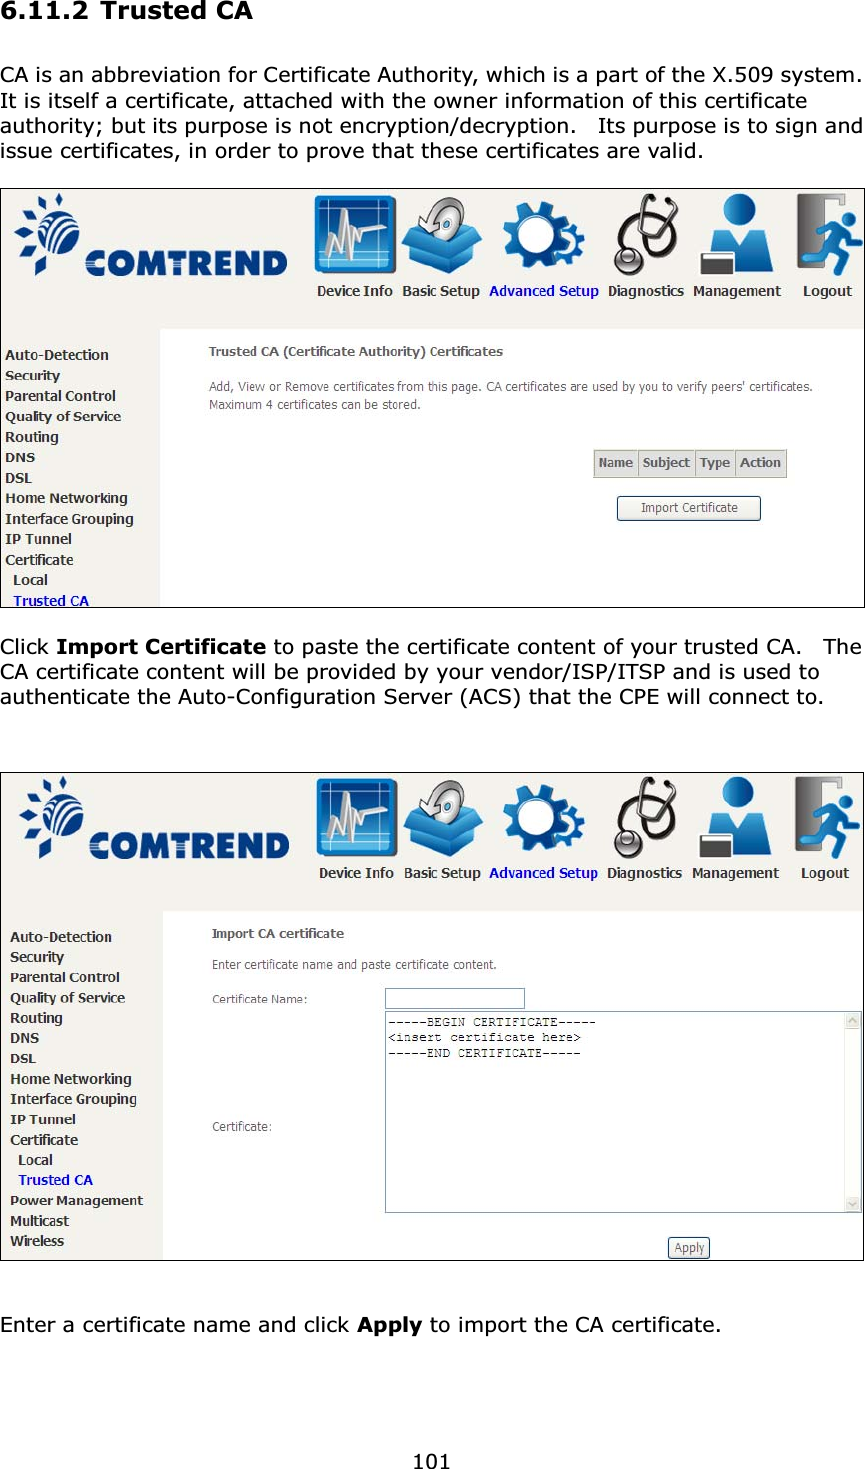 1016.11.2 Trusted CACA is an abbreviation for Certificate Authority, which is a part of the X.509 system.   It is itself a certificate, attached with the owner information of this certificate authority; but its purpose is not encryption/decryption.    Its purpose is to sign and issue certificates, in order to prove that these certificates are valid.Click Import Certificate to paste the certificate content of your trusted CA.  The CA certificate content will be provided by your vendor/ISP/ITSP and is used to authenticate the Auto-Configuration Server (ACS) that the CPE will connect to.Enter a certificate name and click Apply to import the CA certificate.